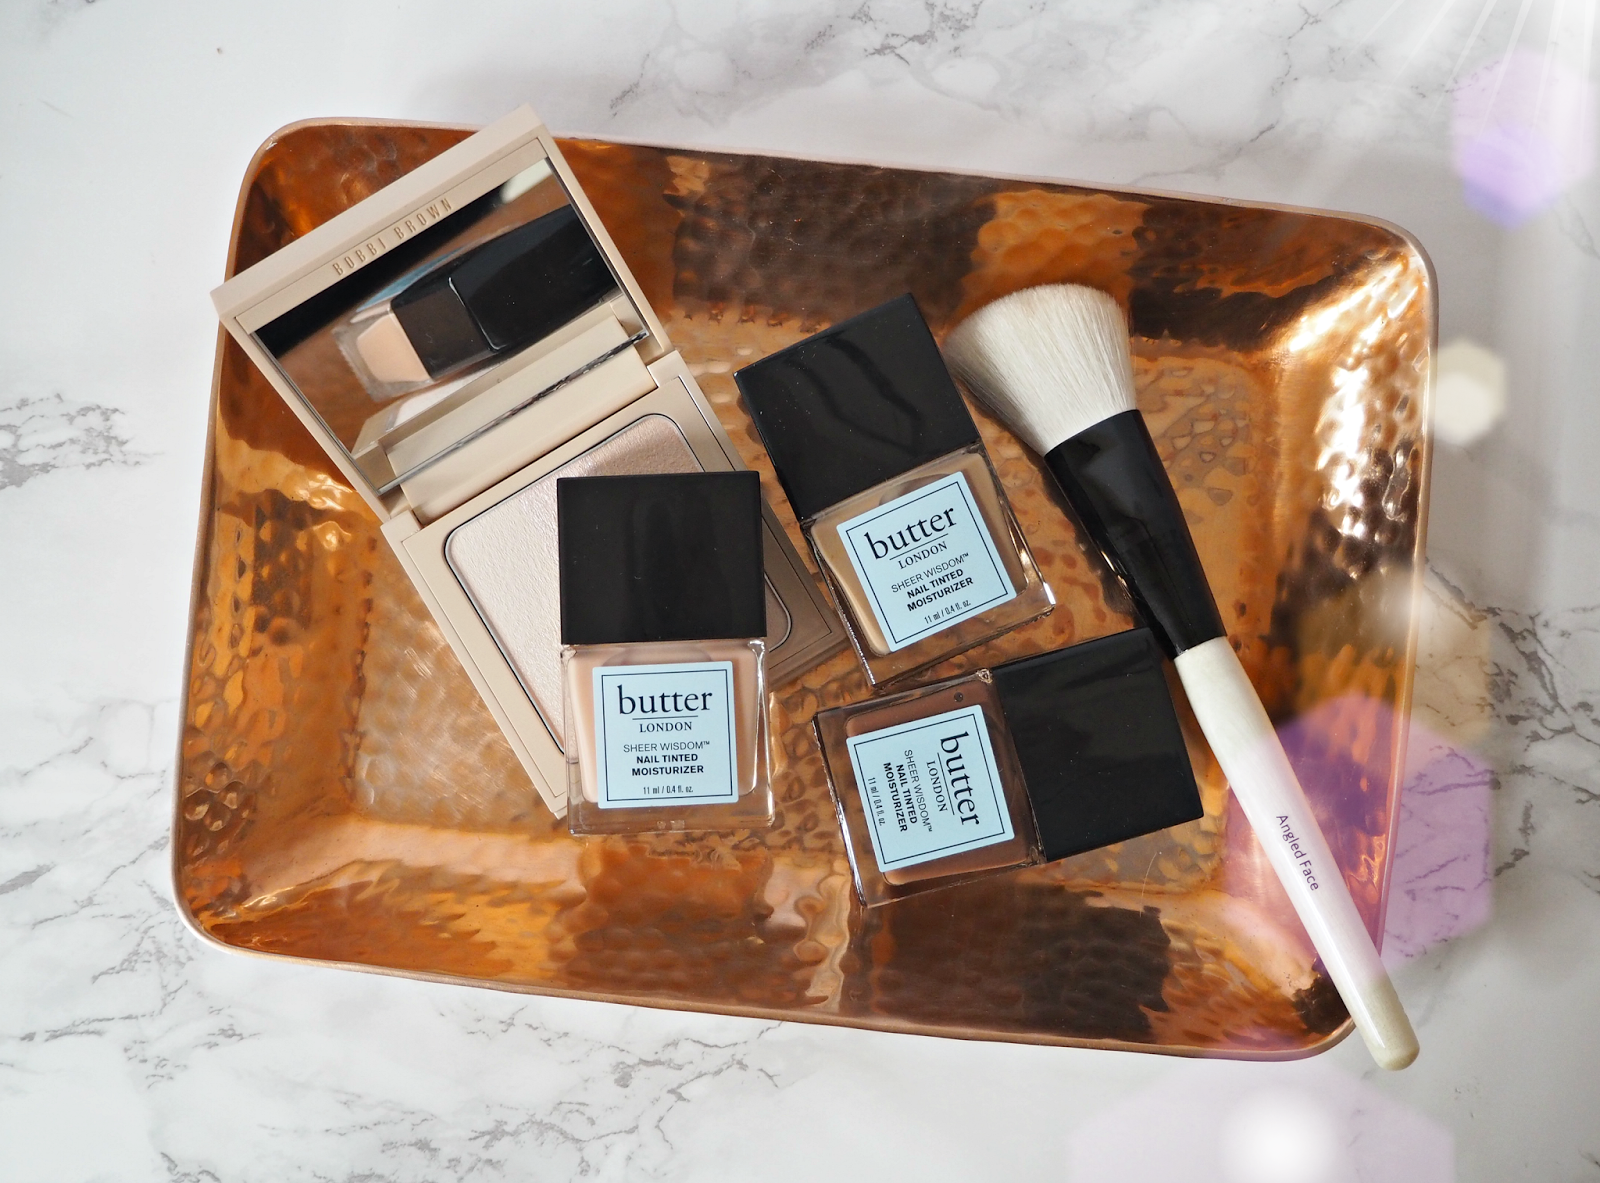 Innovative & Unique: Butter London's NEW 'Sheer Wisdom' Nail Tinted Moisturizer